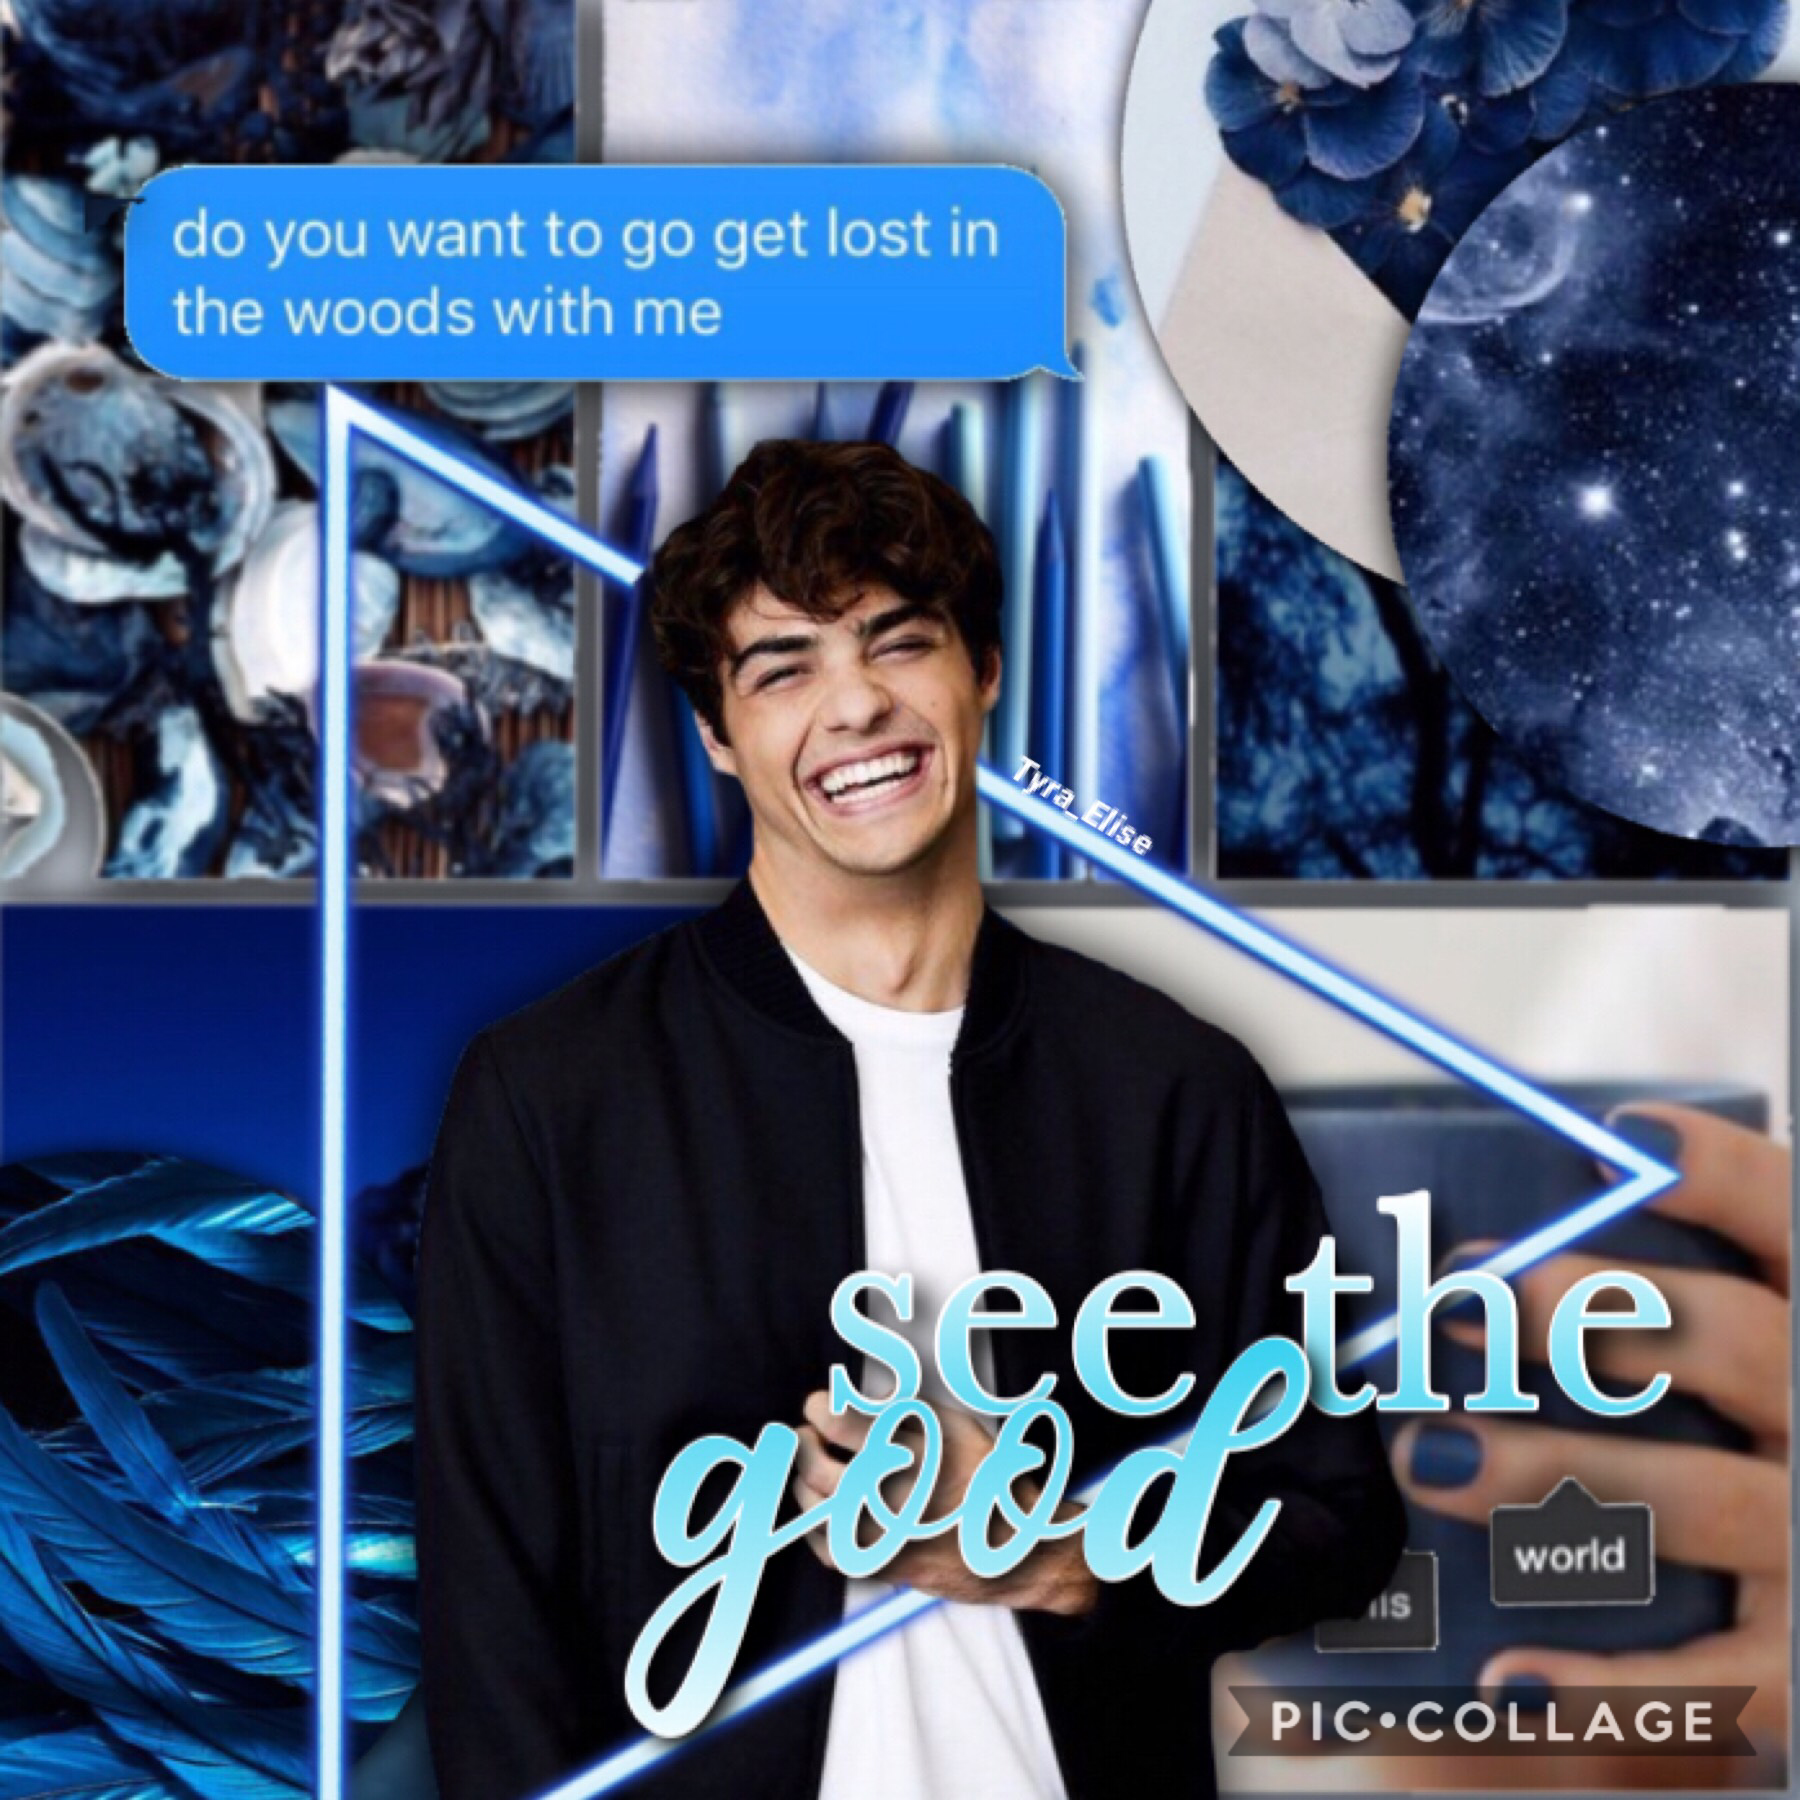 Tap 💙
I’m back posting! 👏🏻🥳
I also made like 2 or 3 more edits so expect to see me posting again anytime this week. 🤗
Btw do u know who this is? ☺️
Qotd: How long have you been following me? 🤔😋
💙1/21/19💙